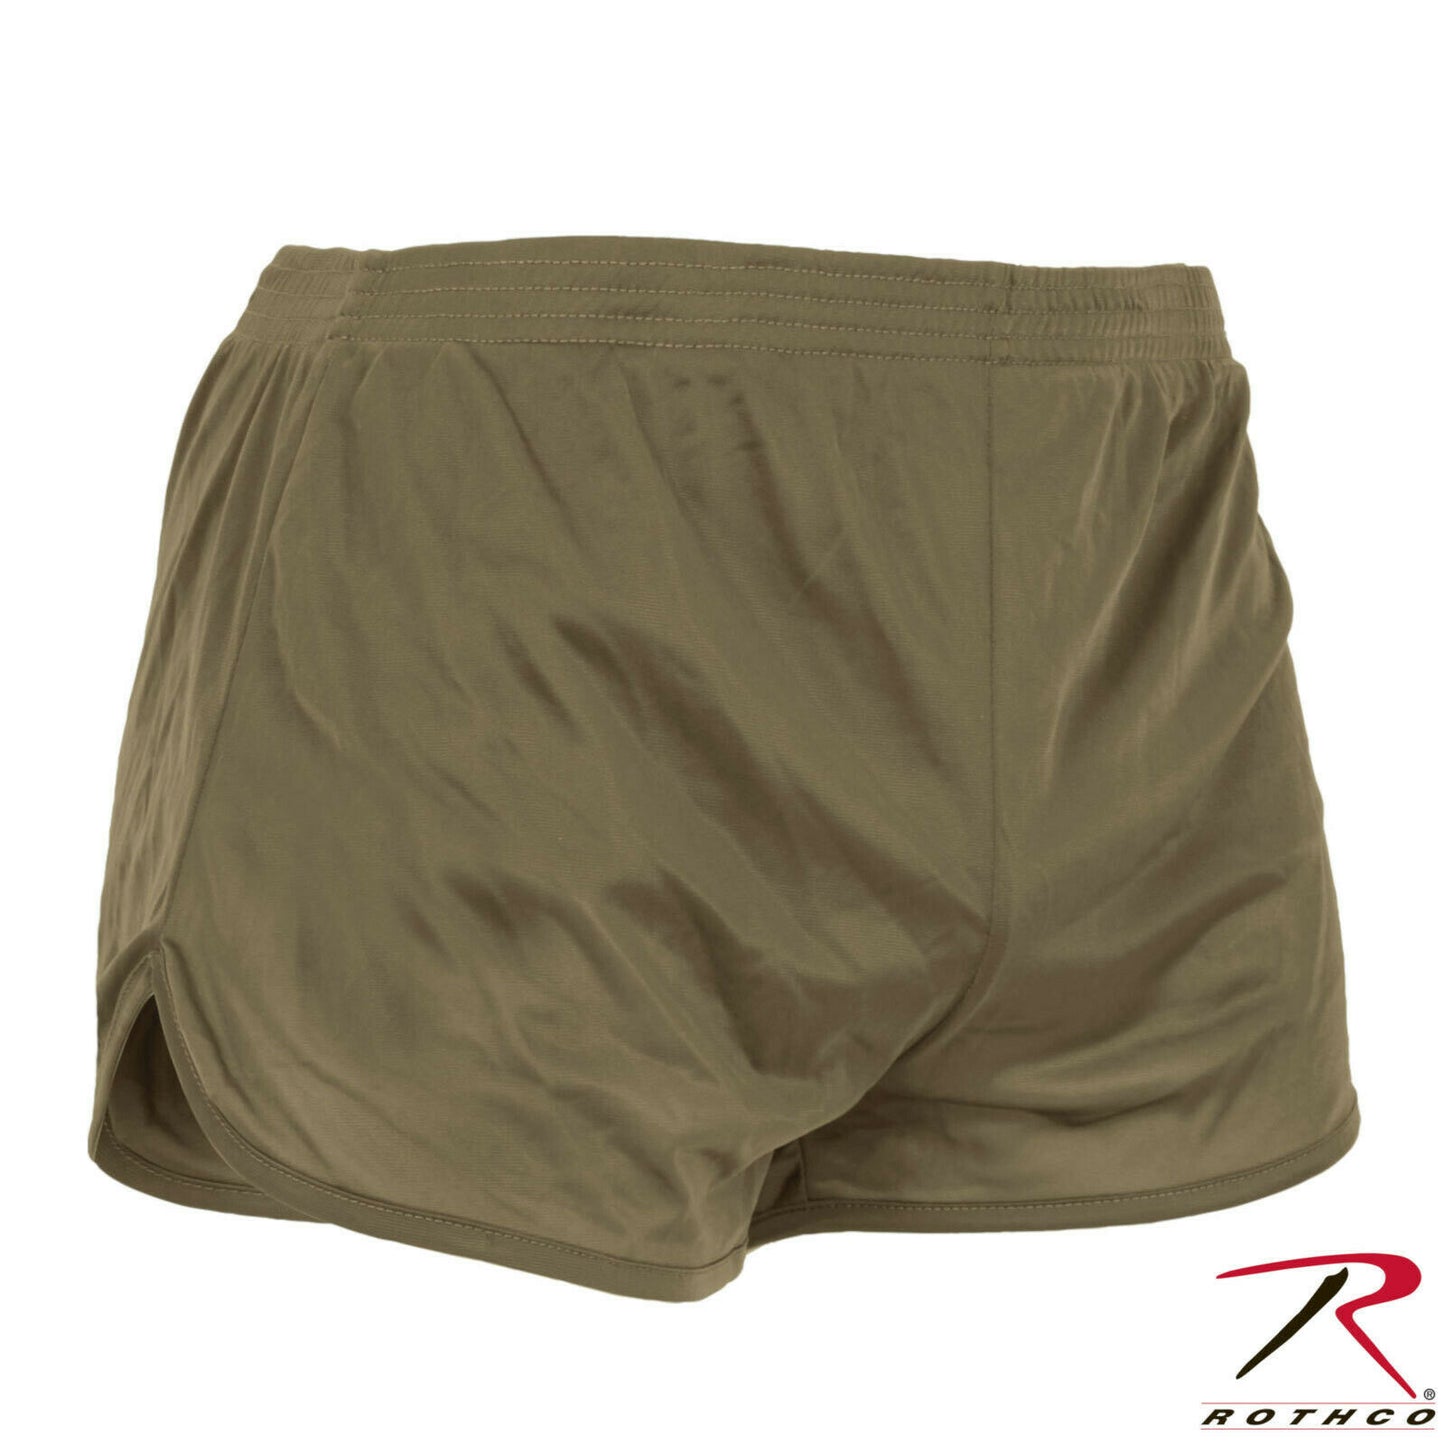 AR 670-1 Coyote Brown GI Style Lightweight Physical Training PT Shorts